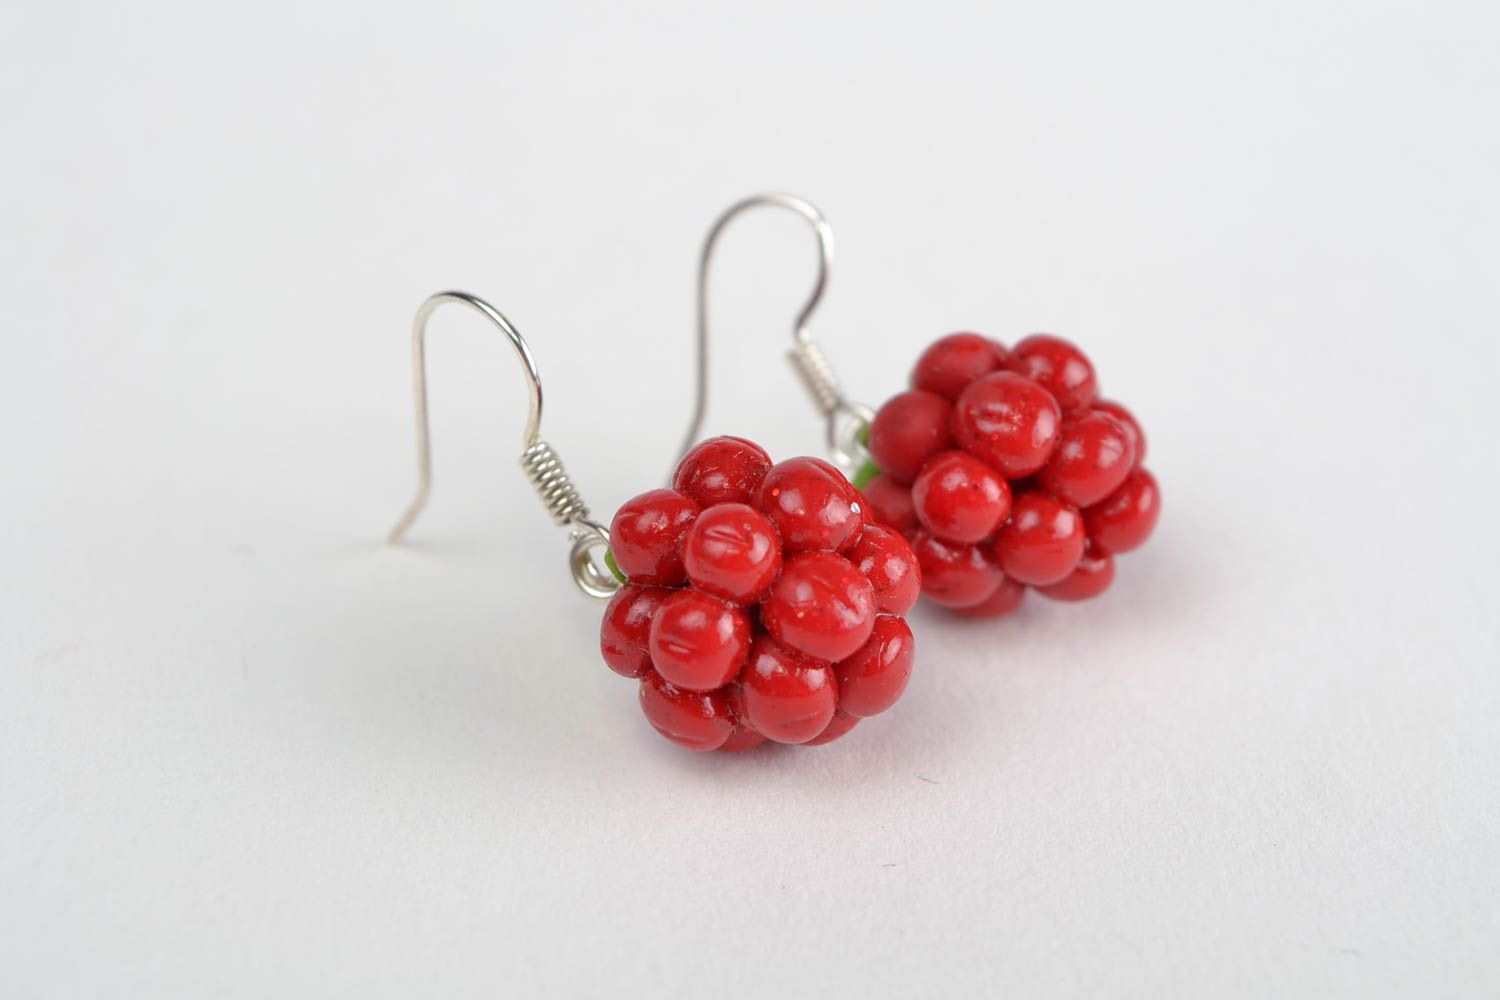 Handmade designer cute polymer clay earrings in the shape of red raspberry photo 4